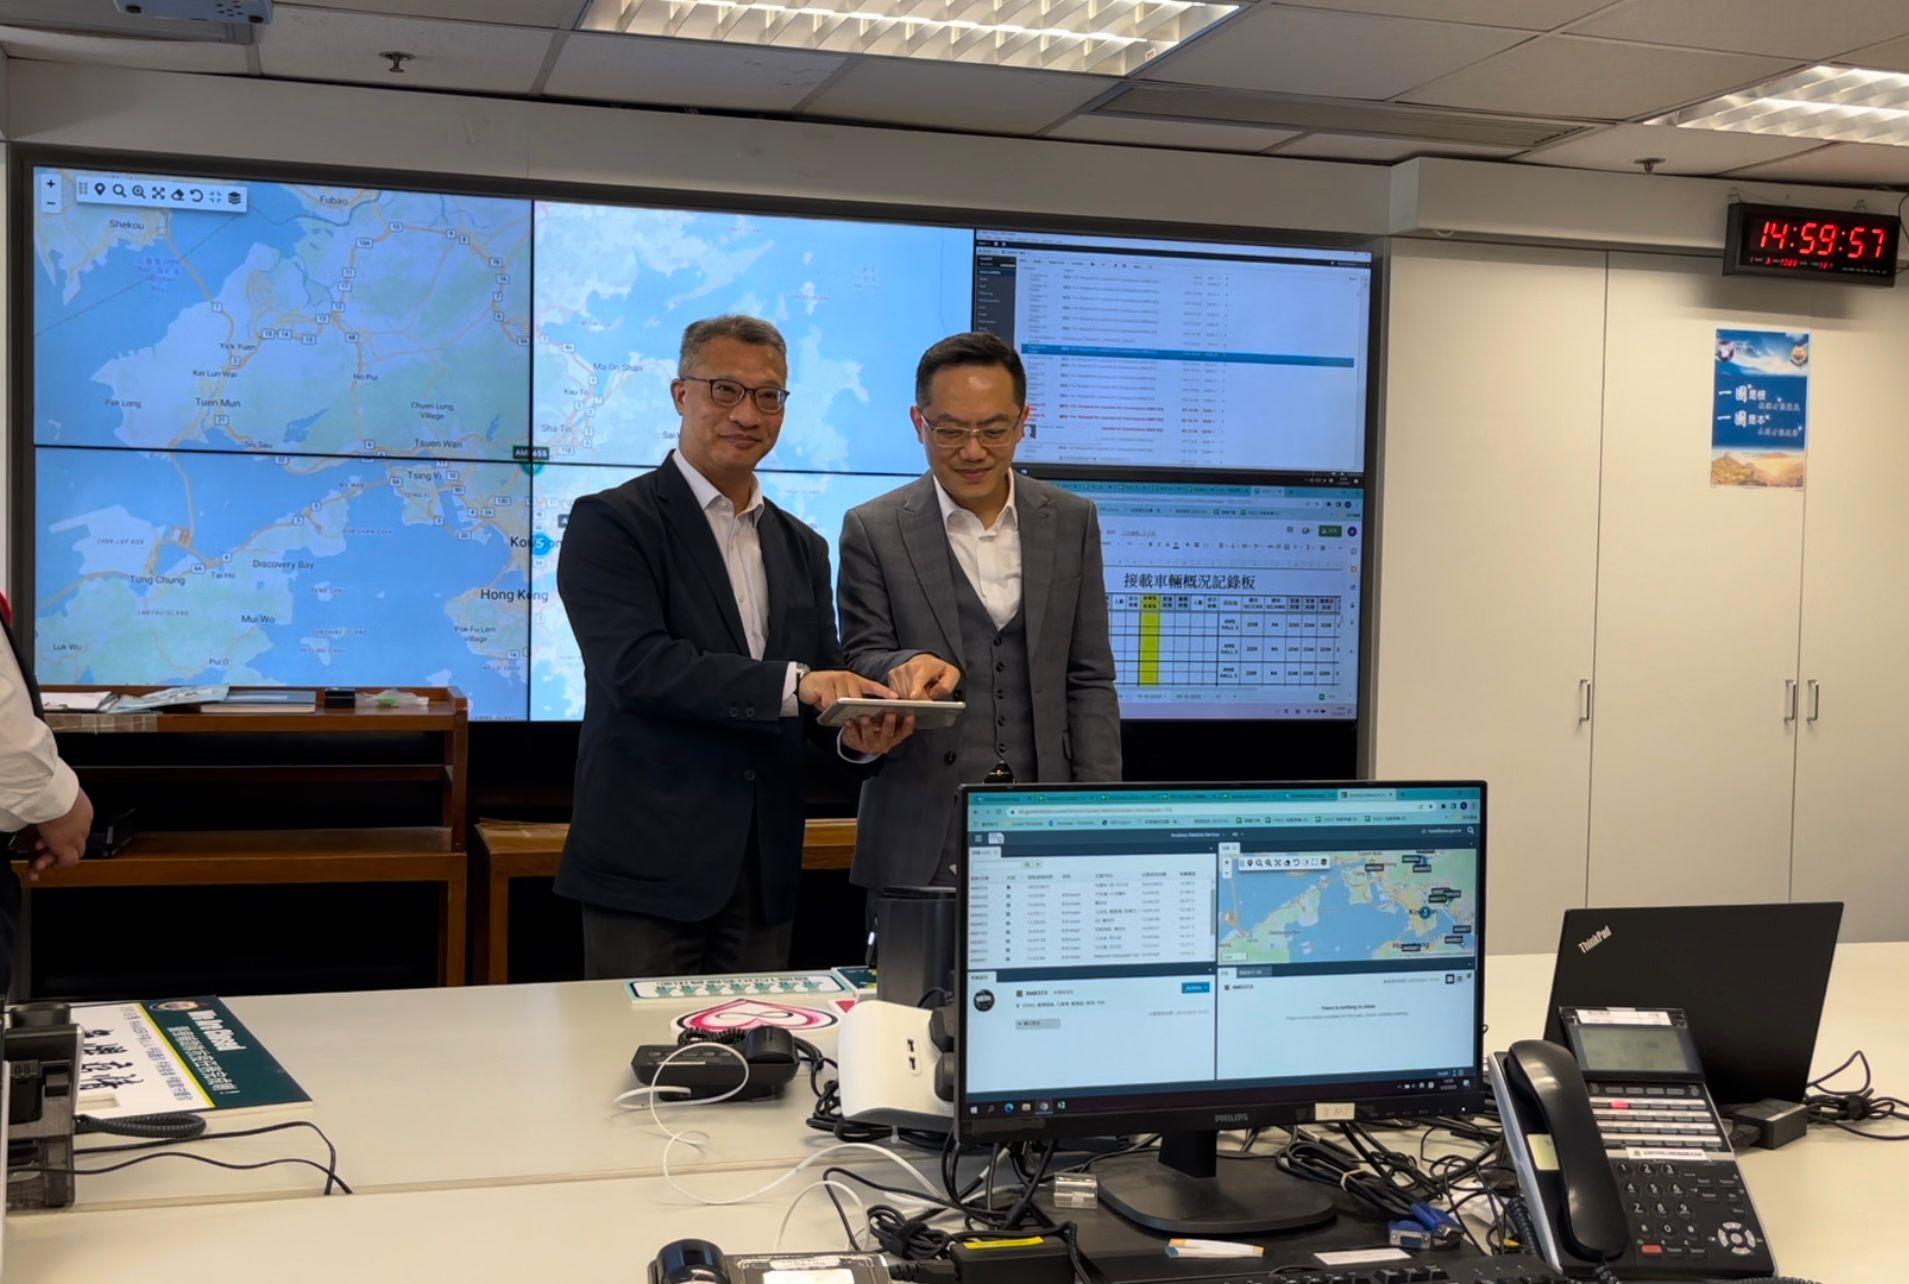 The Auxiliary Medical Service (AMS)’s Headquarters Control Room, which was activated in view of the epidemic, ceased operation today (March 1). Photo shows the Commissioner of the AMS, Dr Ronald Lam (right), and the Chief Staff Officer, Mr Wong Ying-keung (left), officiating at the lights-off ceremony in the Headquarters Control Room, signifying the completion of its COVID-19 anti-epidemic duties.